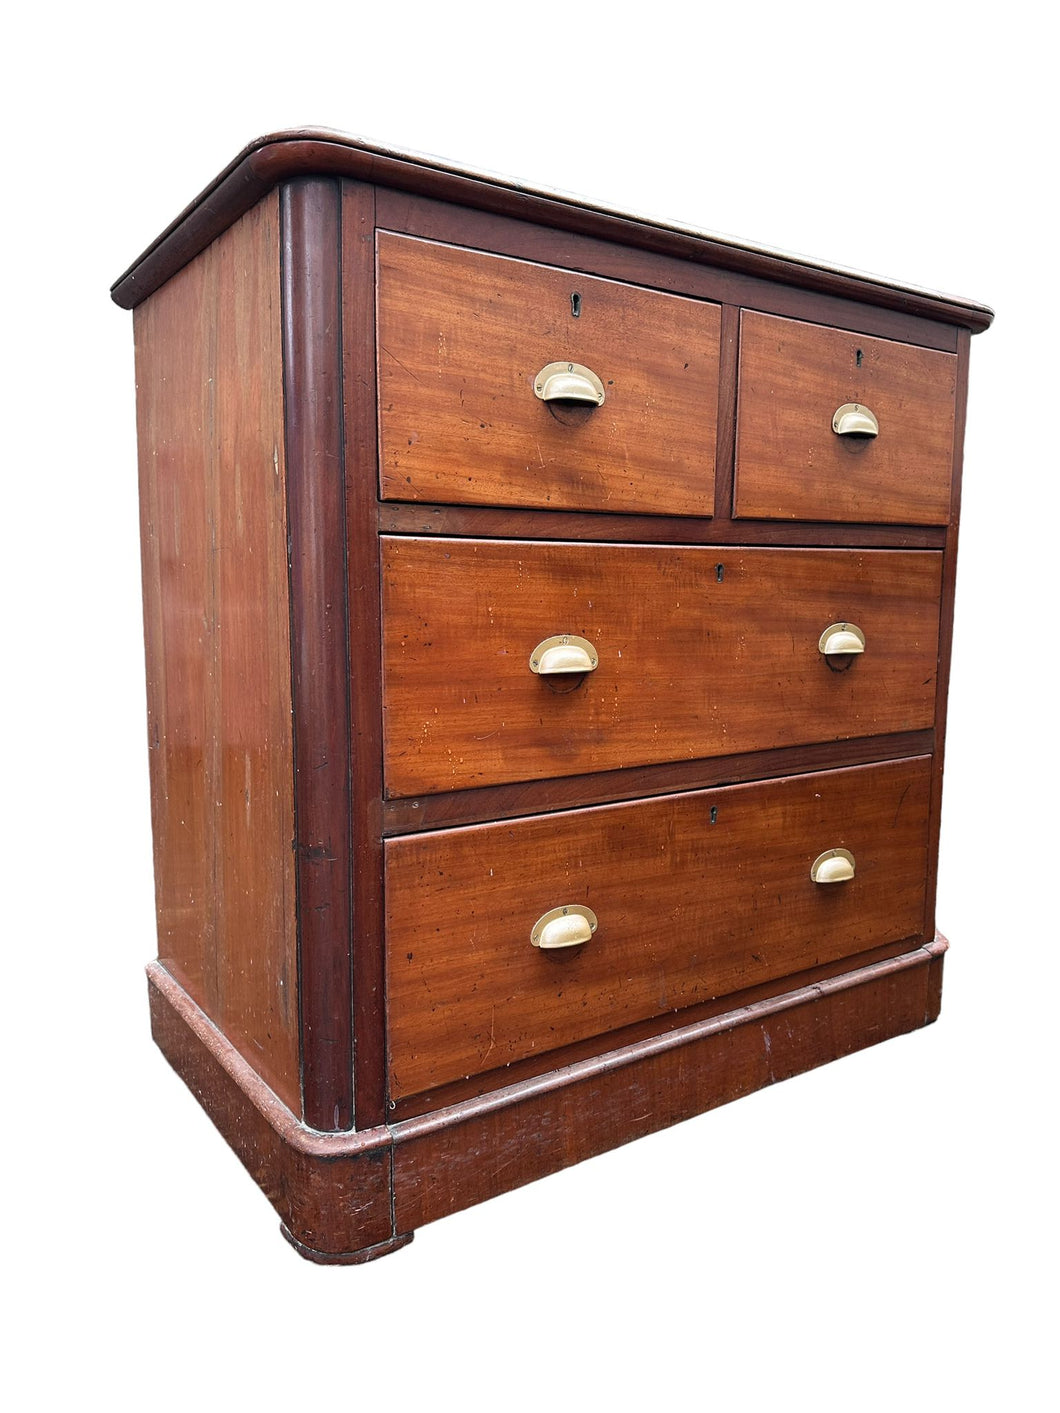 Vintage Mahogany Chest Of Drawers With Cup Handles